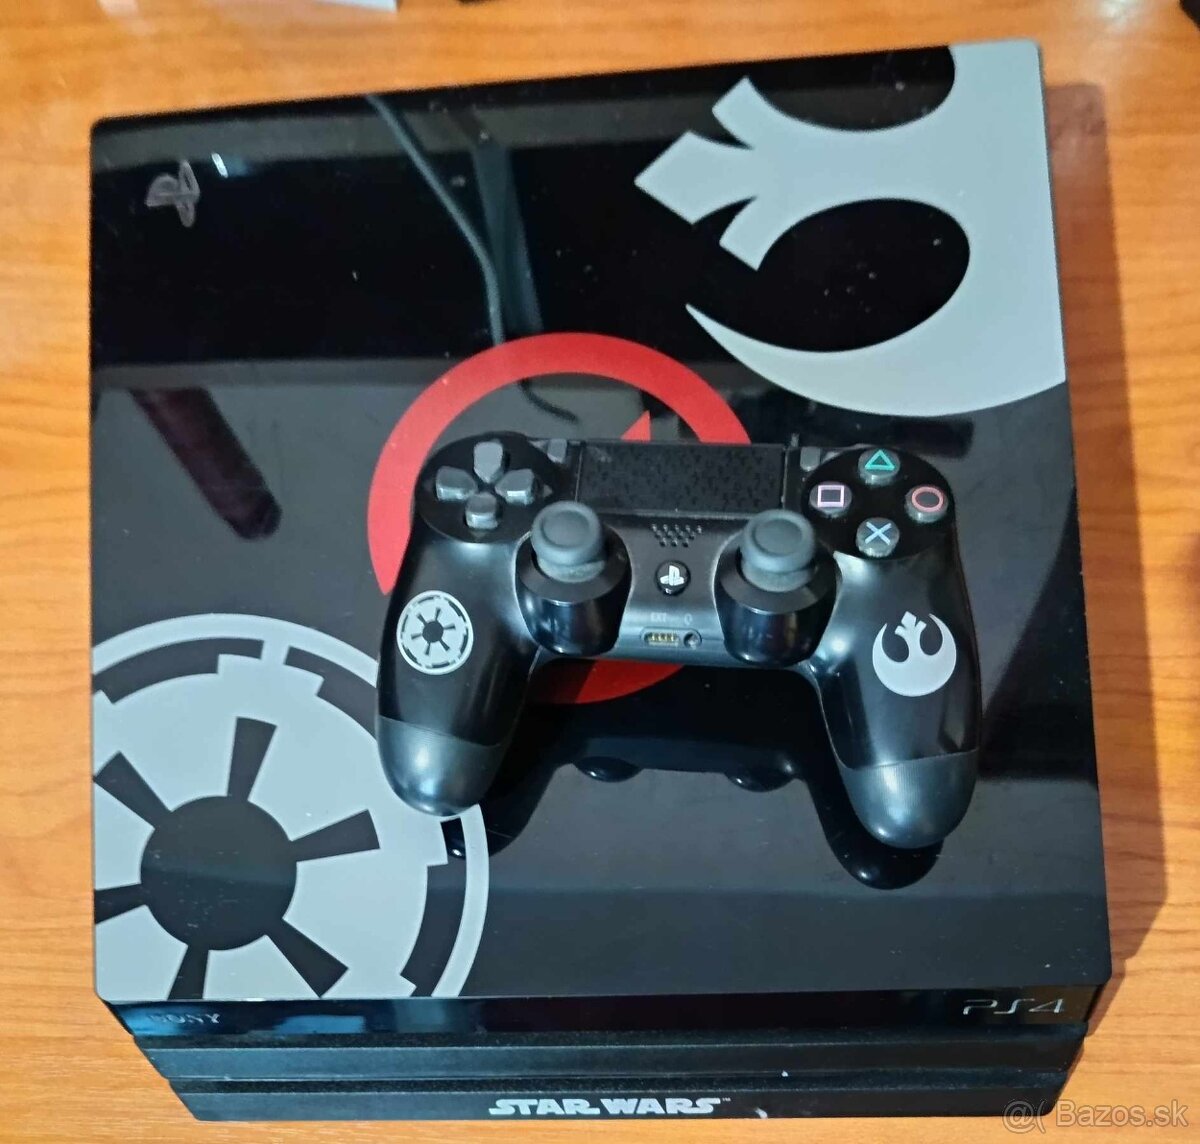 PS 4 pro limited edition starwars battlefront 2